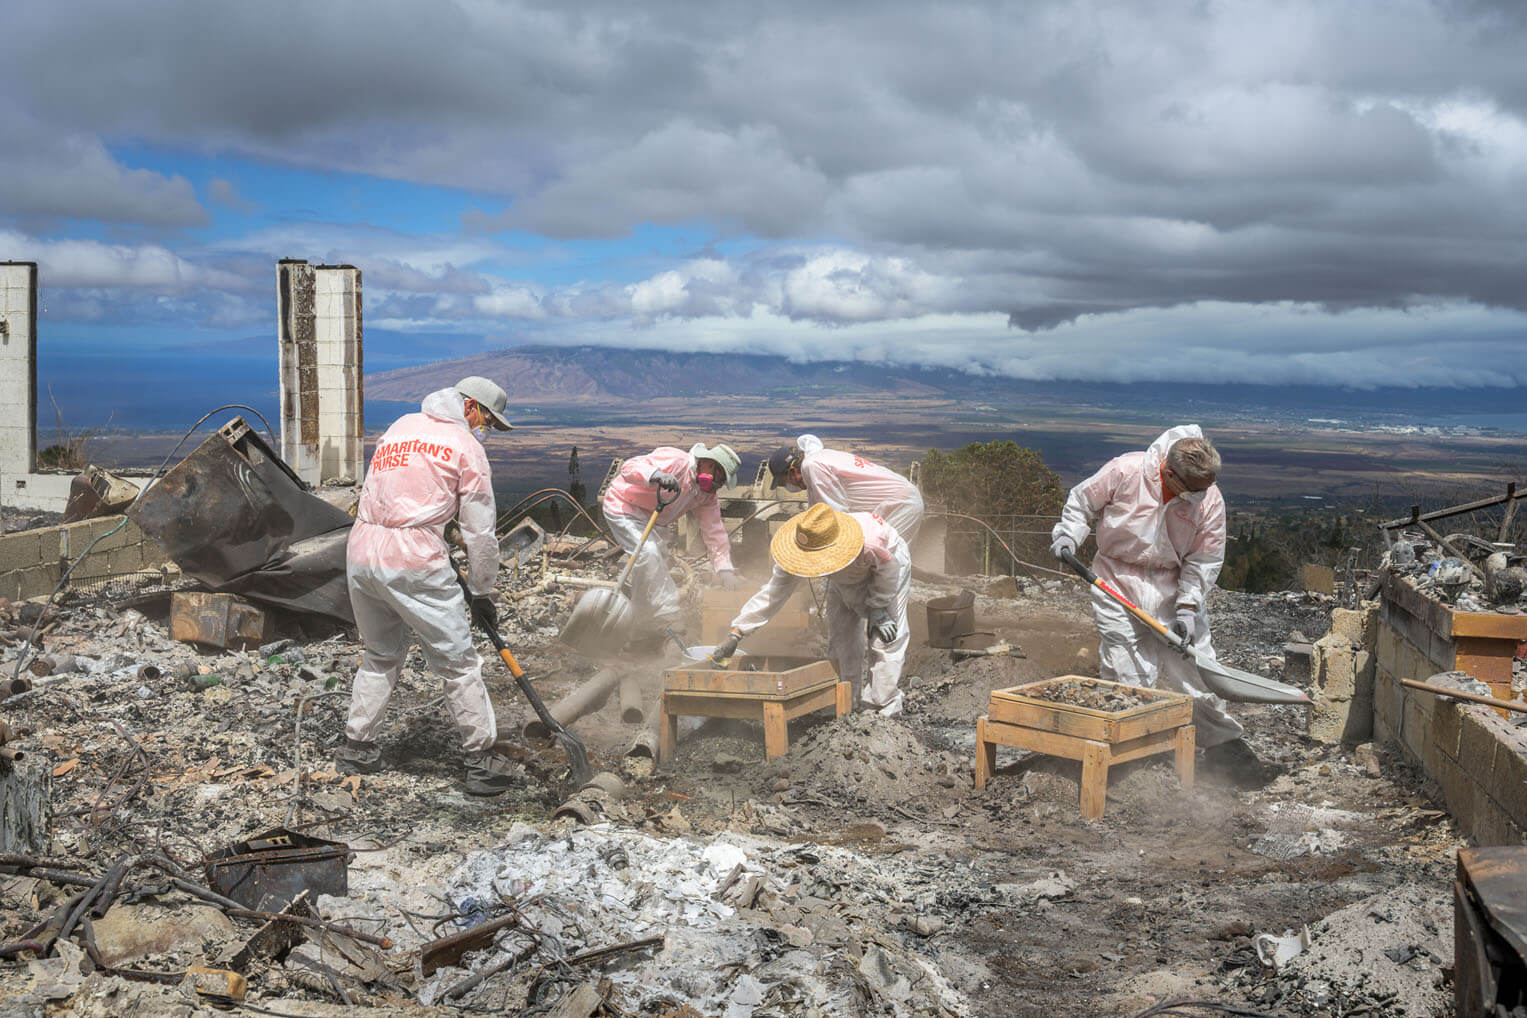 In Tyvek suits, masks, and goggles, Samaritan's Purse volunteers work amid the ruins and ashes of a former home.